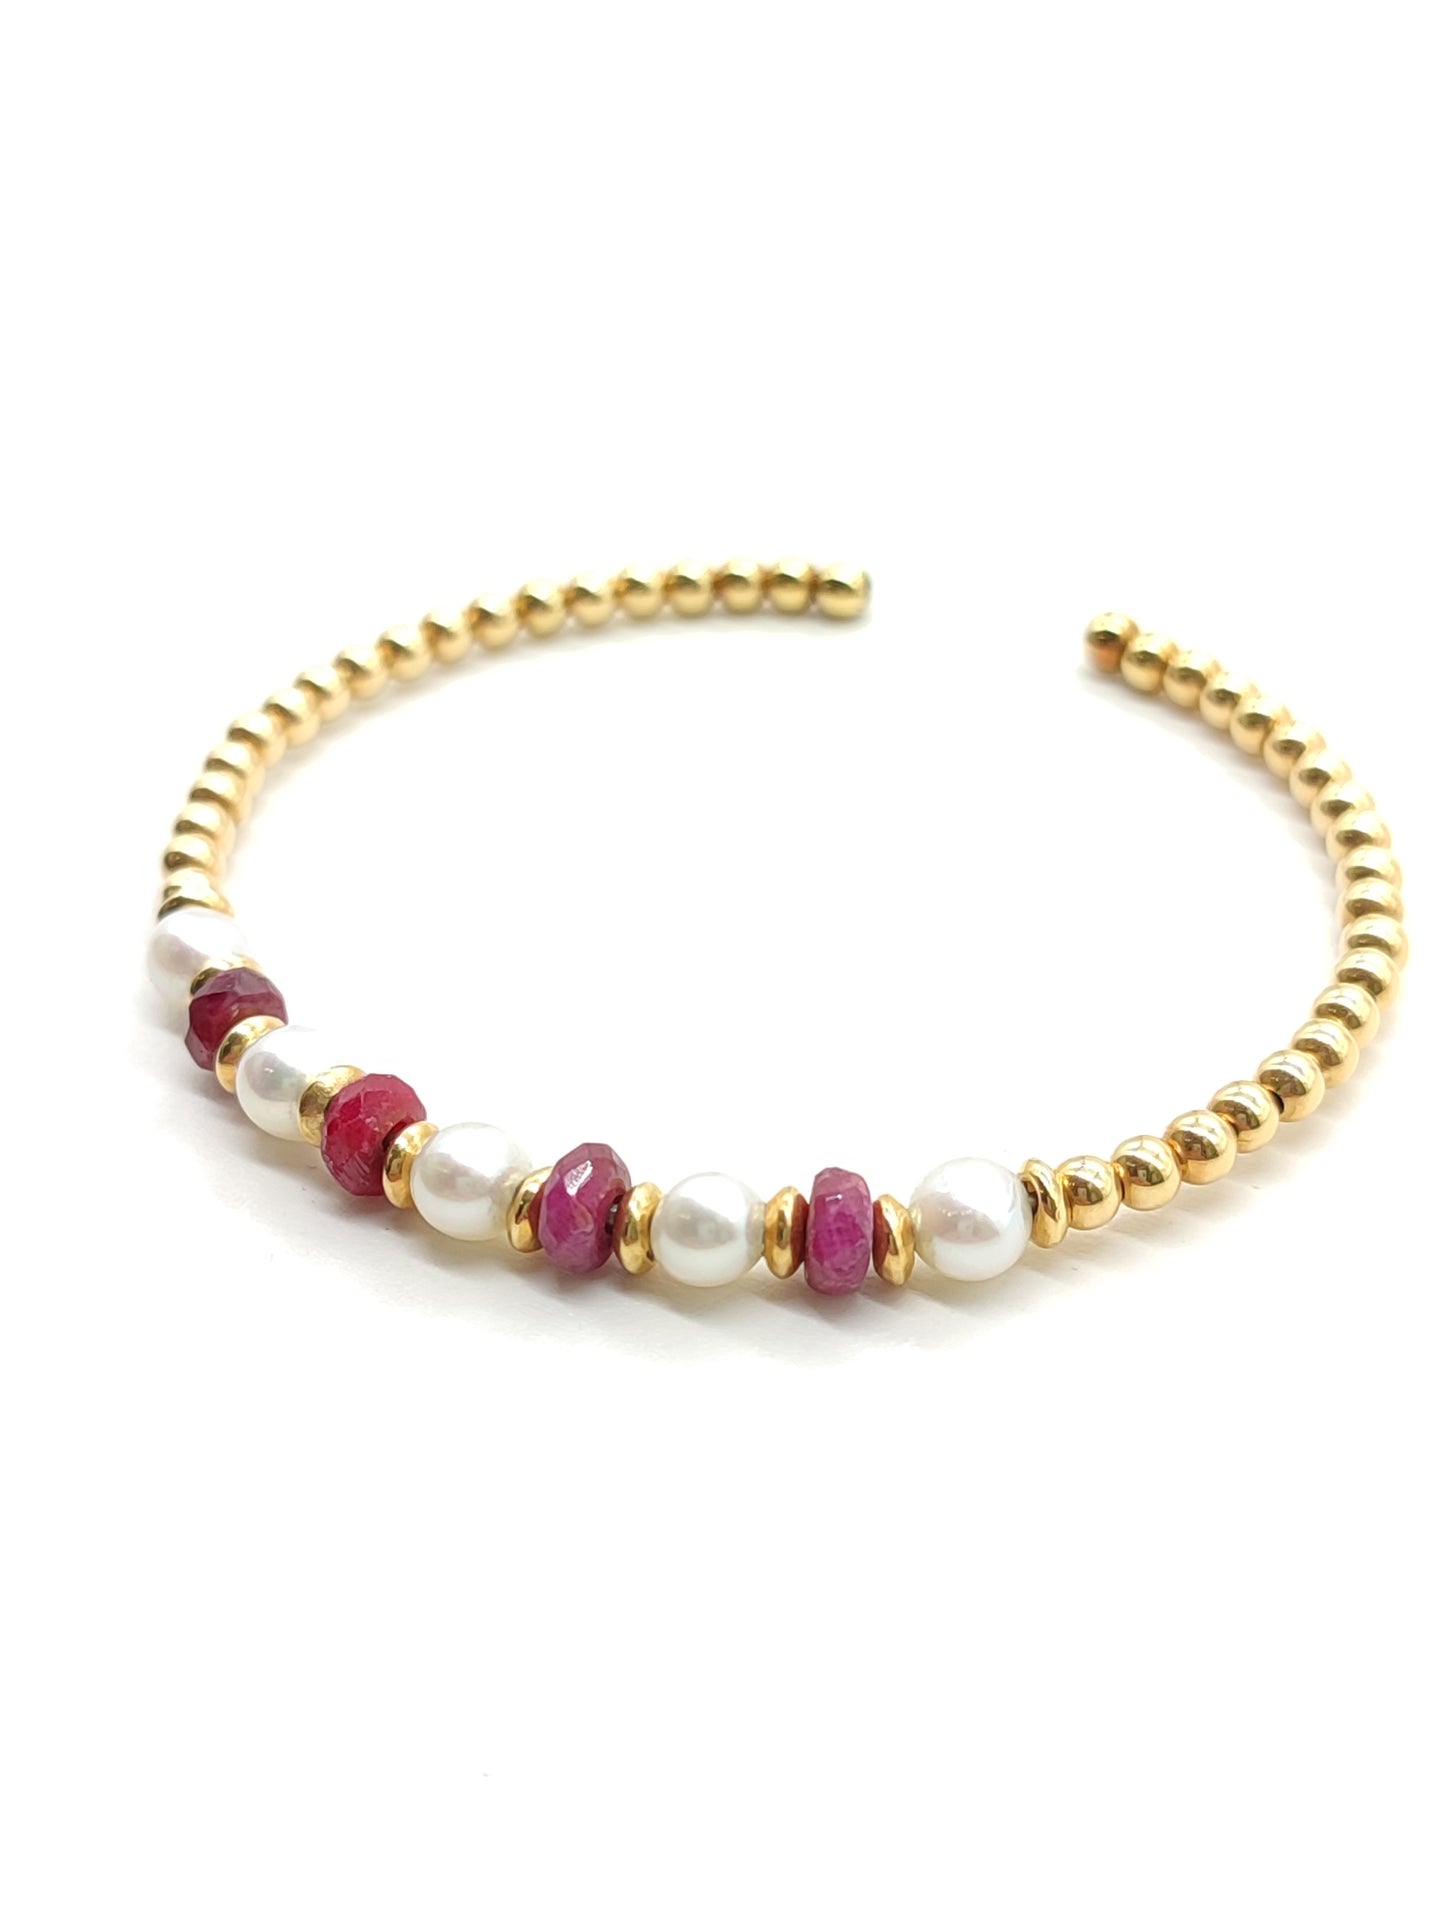 Gold bracelet with pearls and rubies